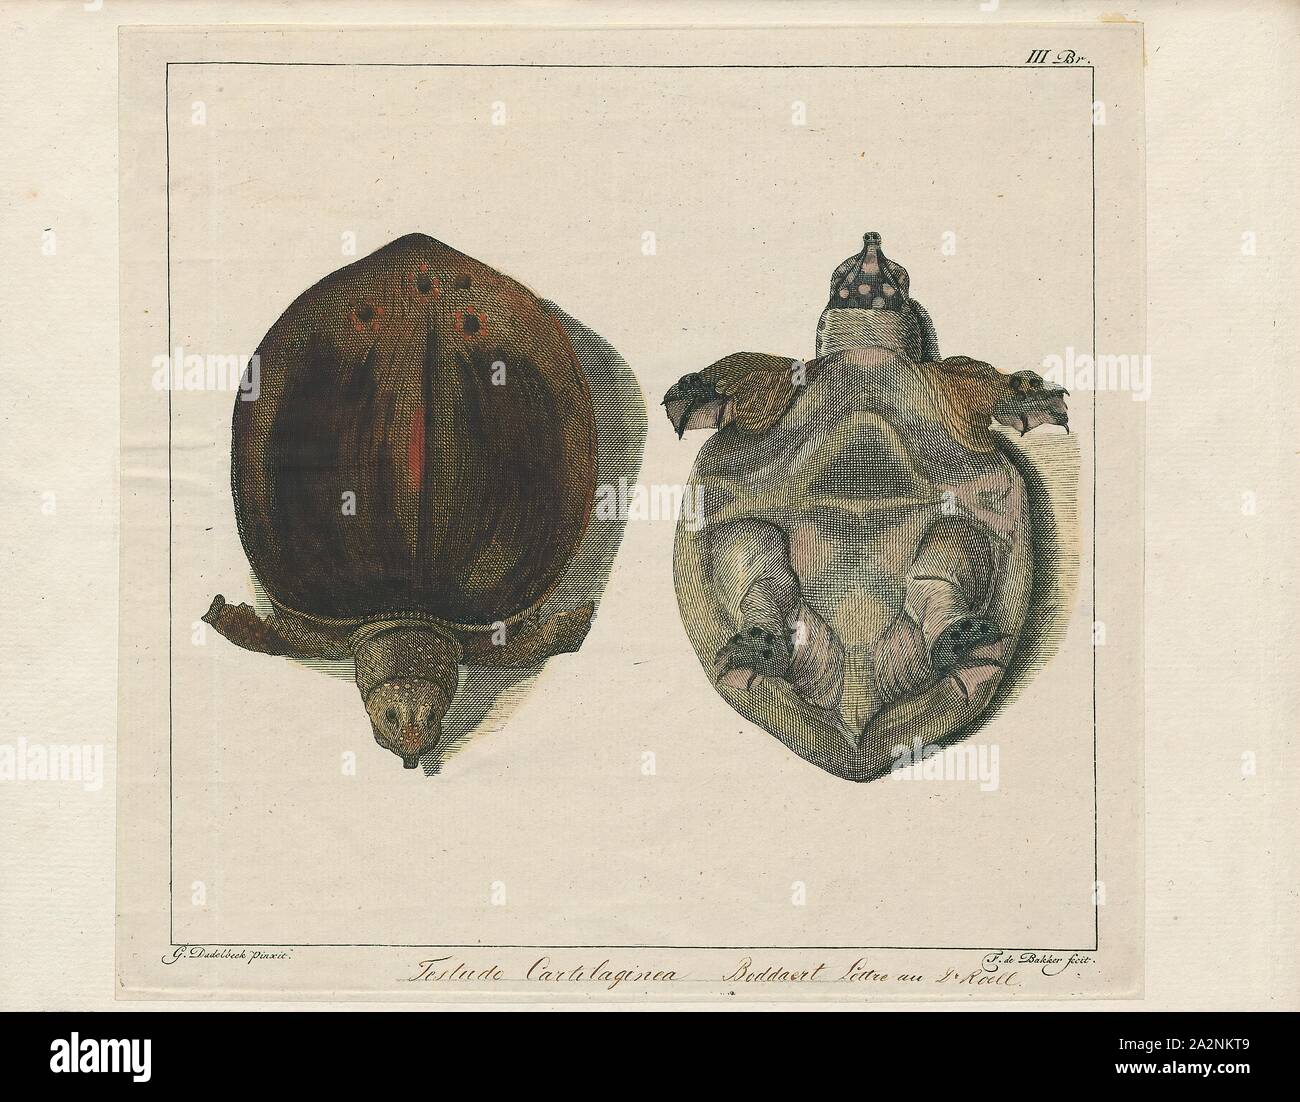 Testudo cartilaginea, Print, The Asiatic softshell turtle or black-rayed softshell turtle (Amyda cartilaginea) is a species of softshell turtle in the Trionychidae family. It is not the only softshell turtle in Asia (most trionychines are Asian)., 1700-1880 Stock Photo